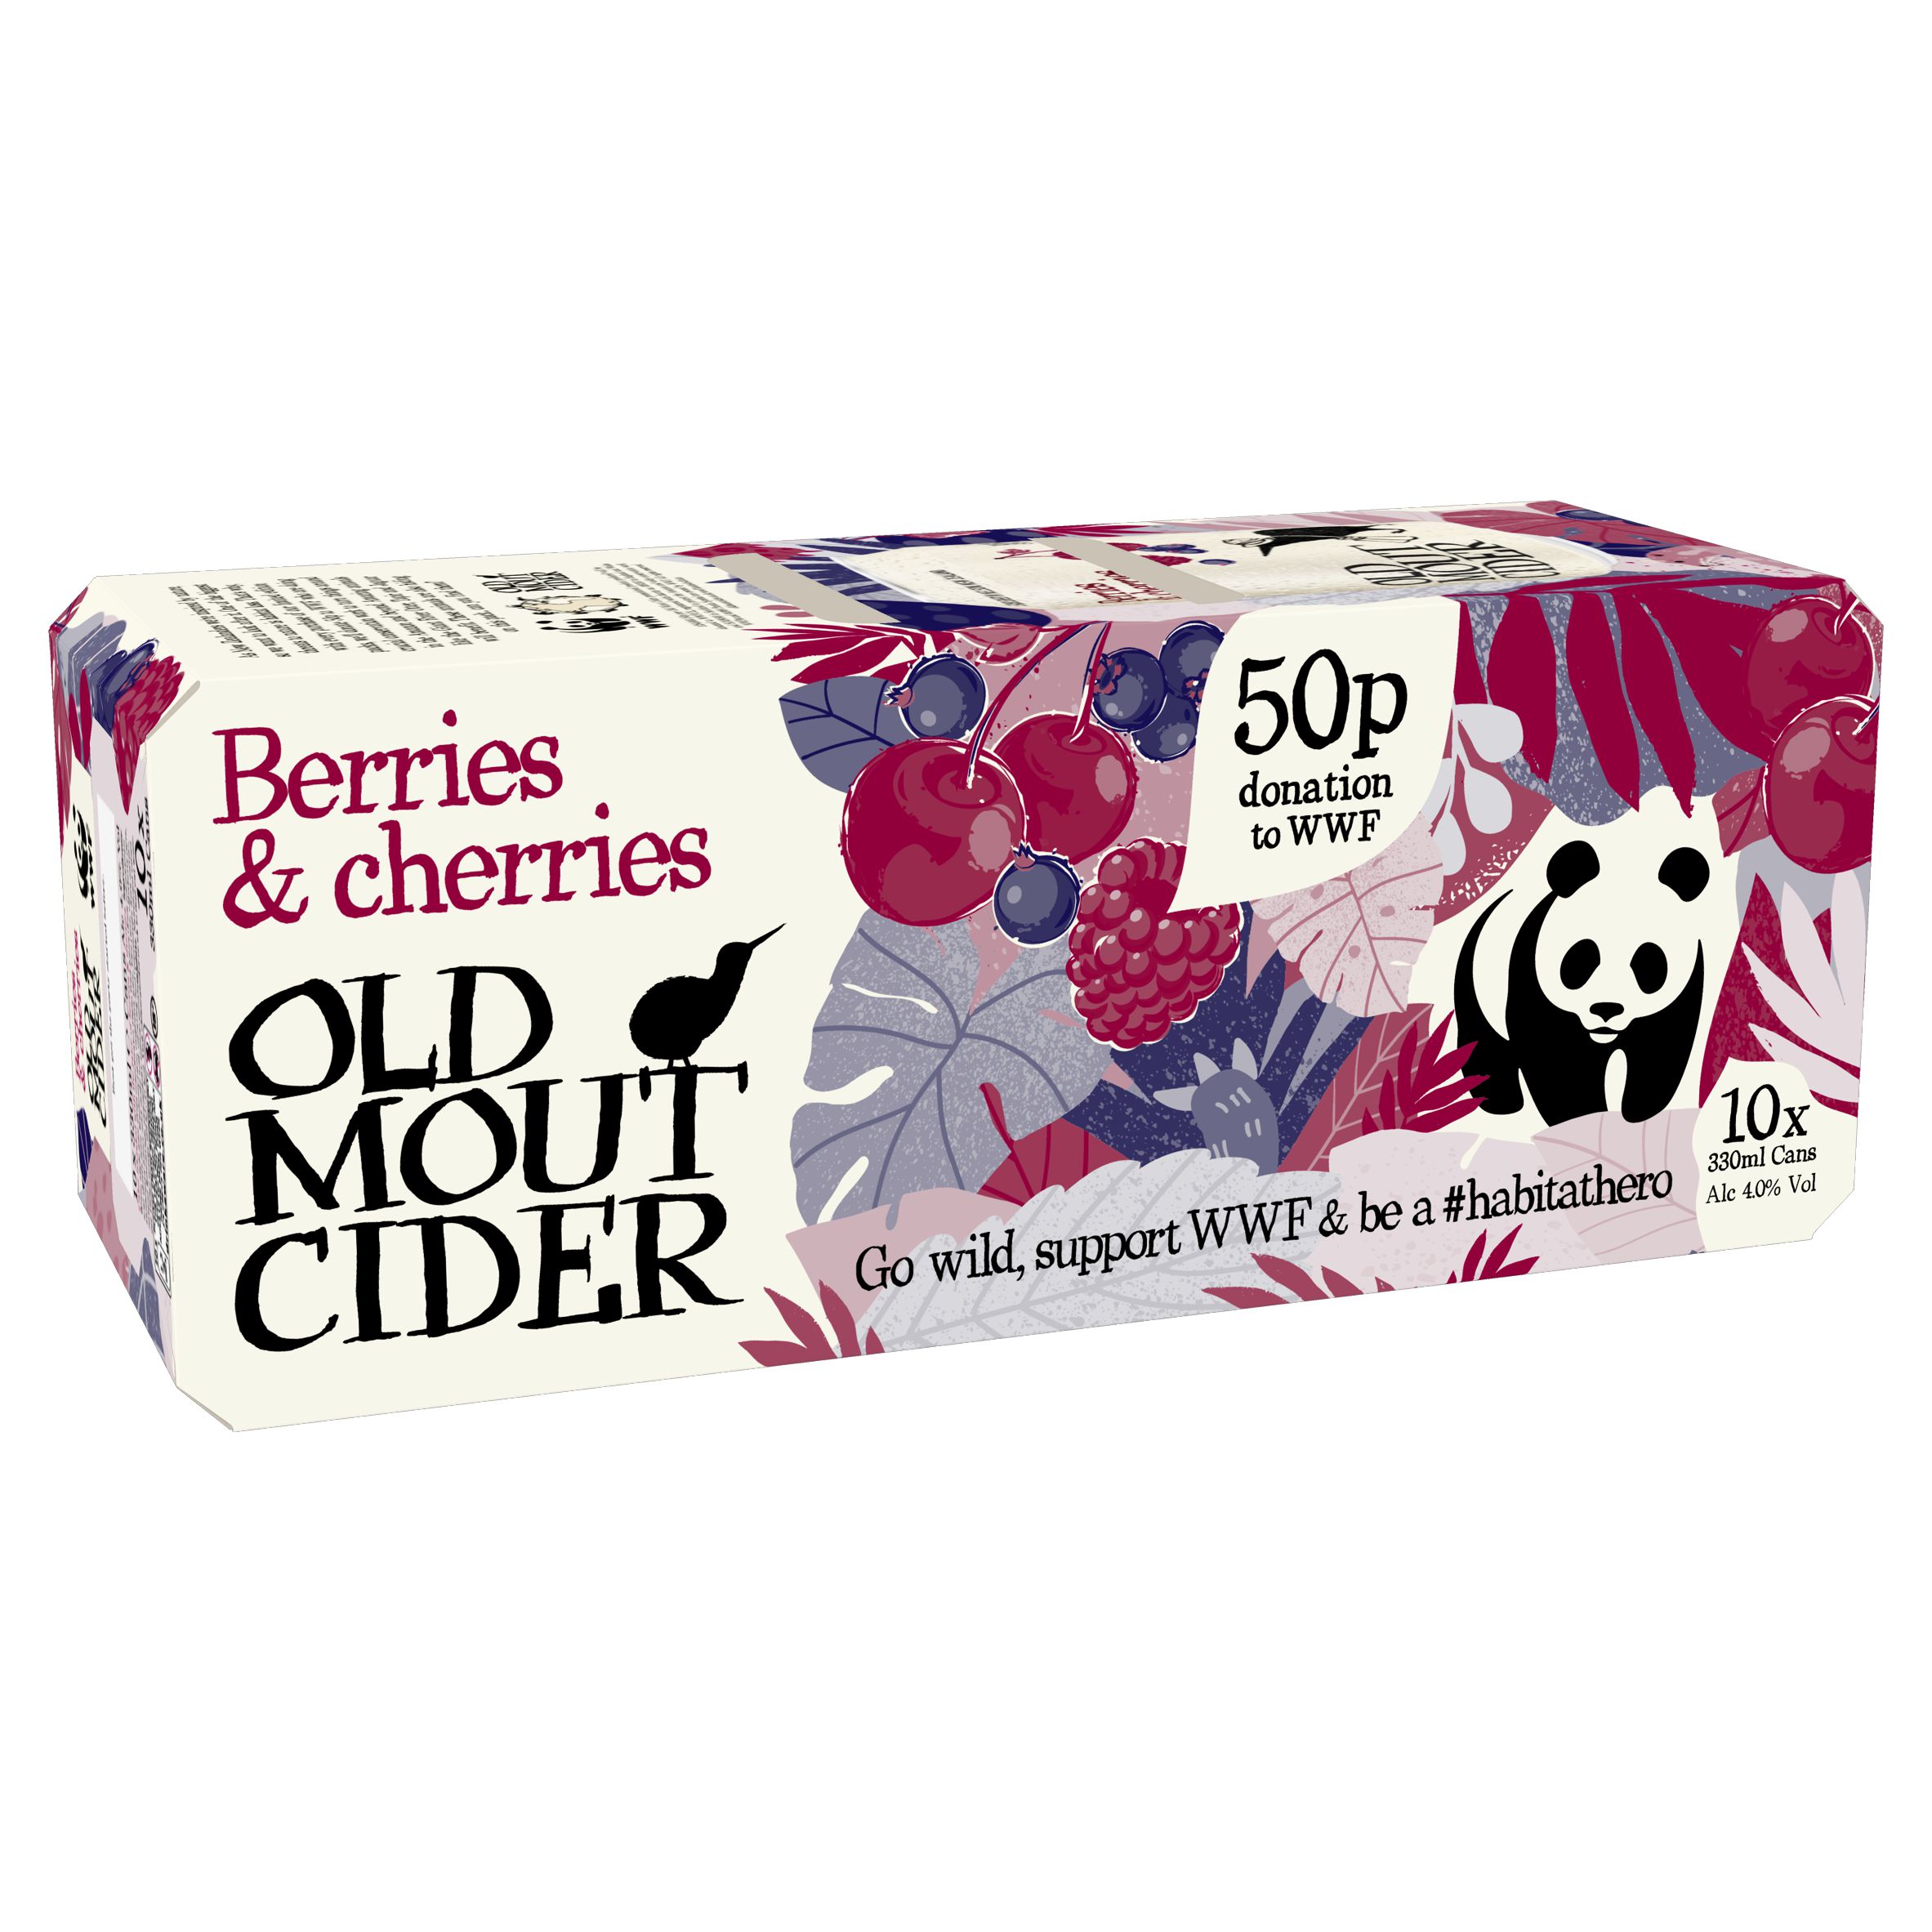 Old Mout cider launches its biggest ever campaign with WWF